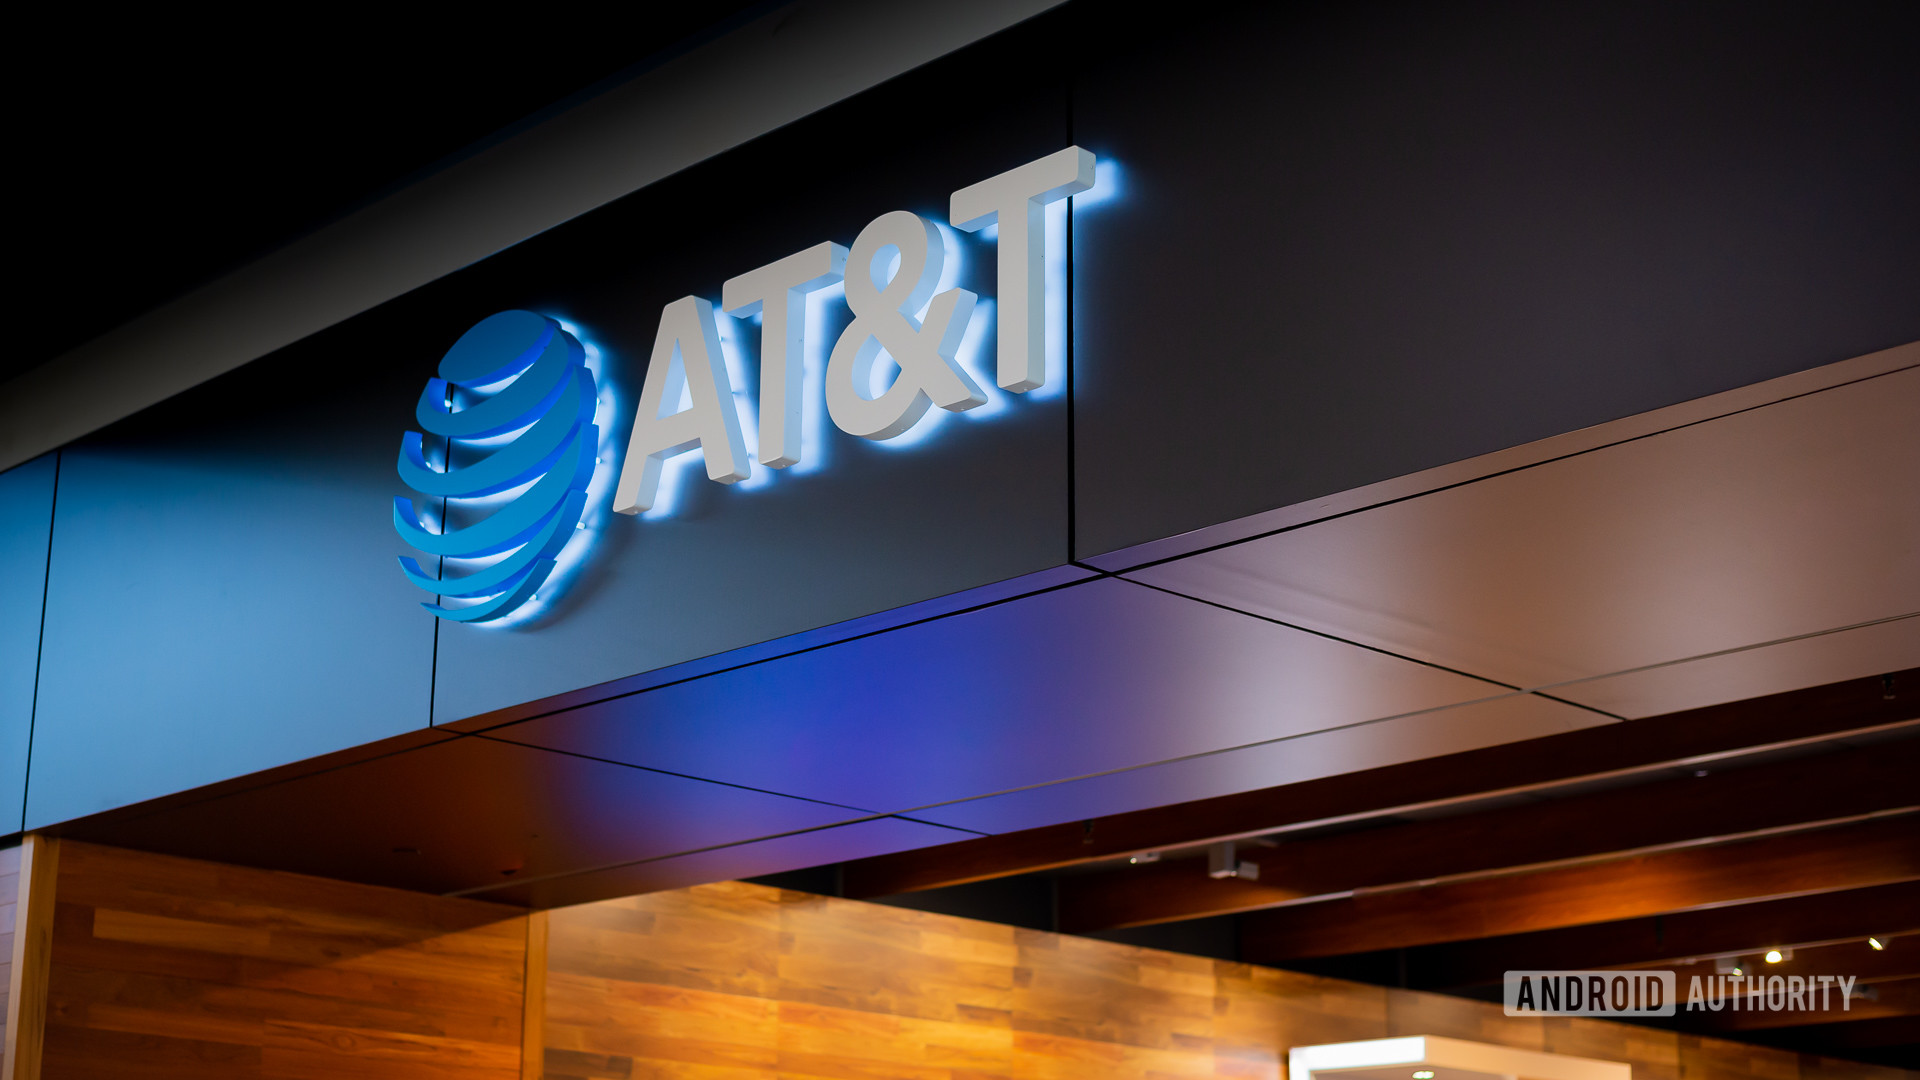 AT&T Launches New 'Turbo' Plan Boost Your Phone's Internet Speed for Just $7 a Month